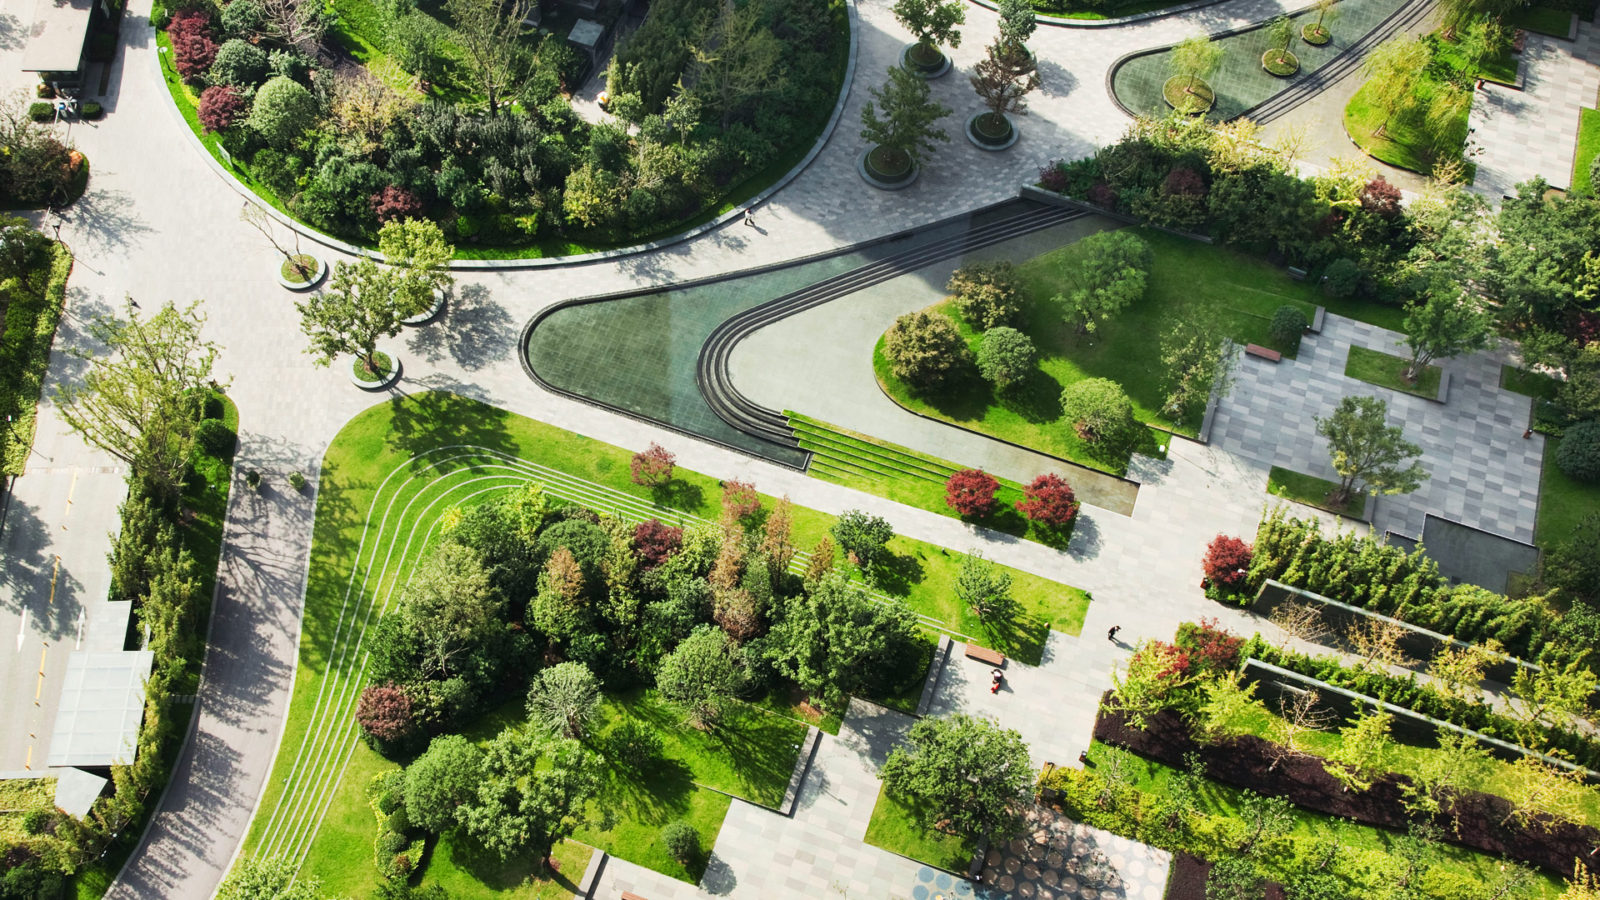 Learn How to Apply for Entry Level Landscape Architecture Jobs